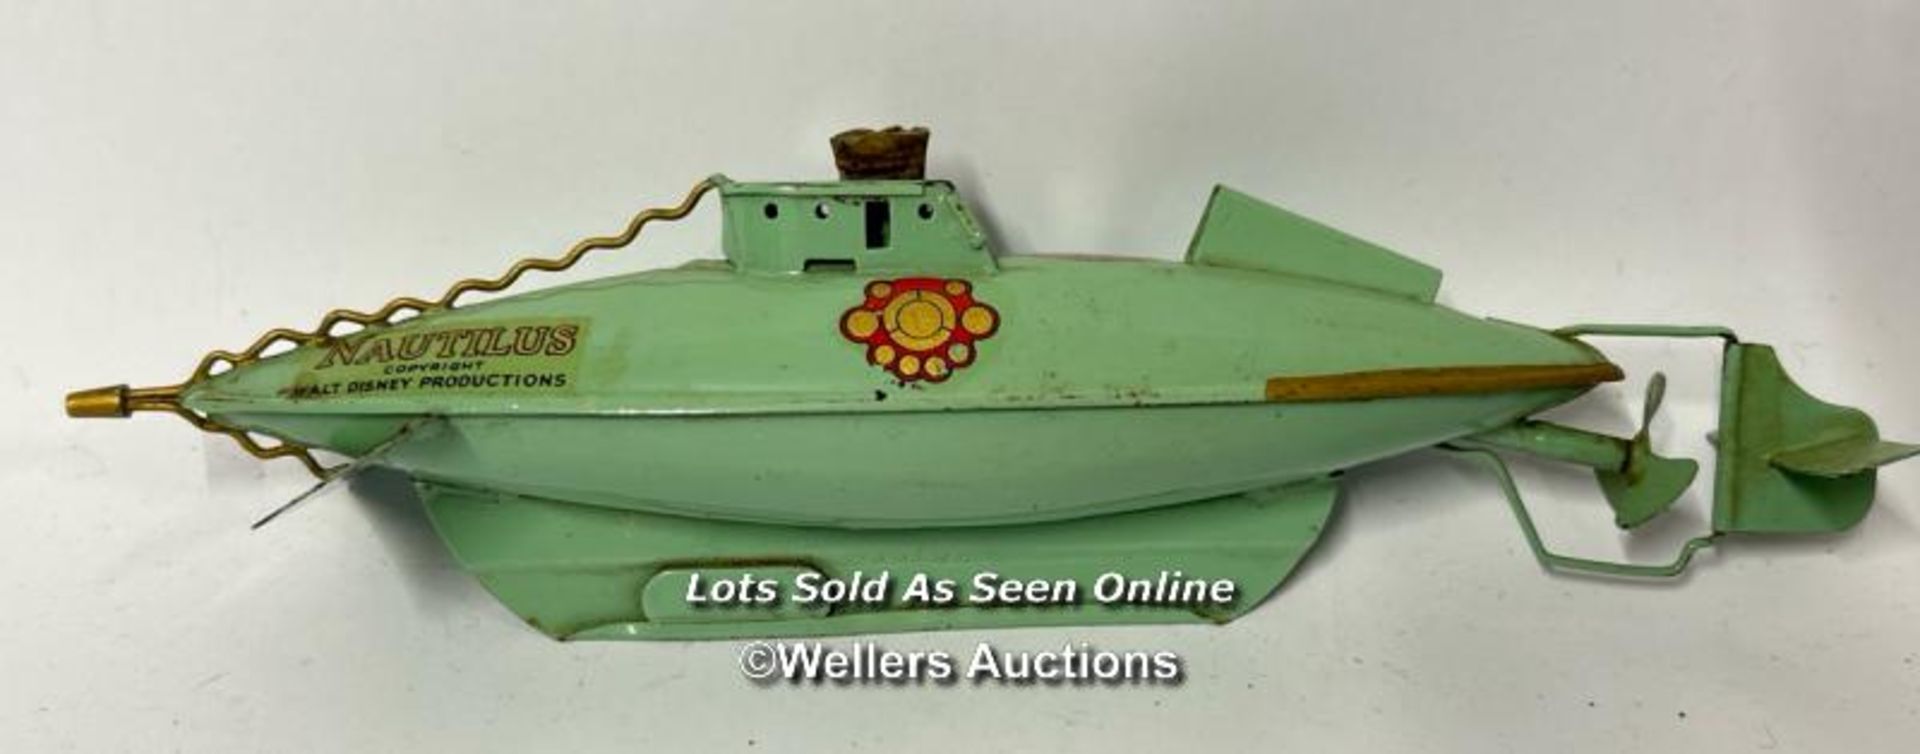 Sutcliffe models "Nautilus" tin toy from Disney's 20,000 Leagues Under the Sea, unboxed